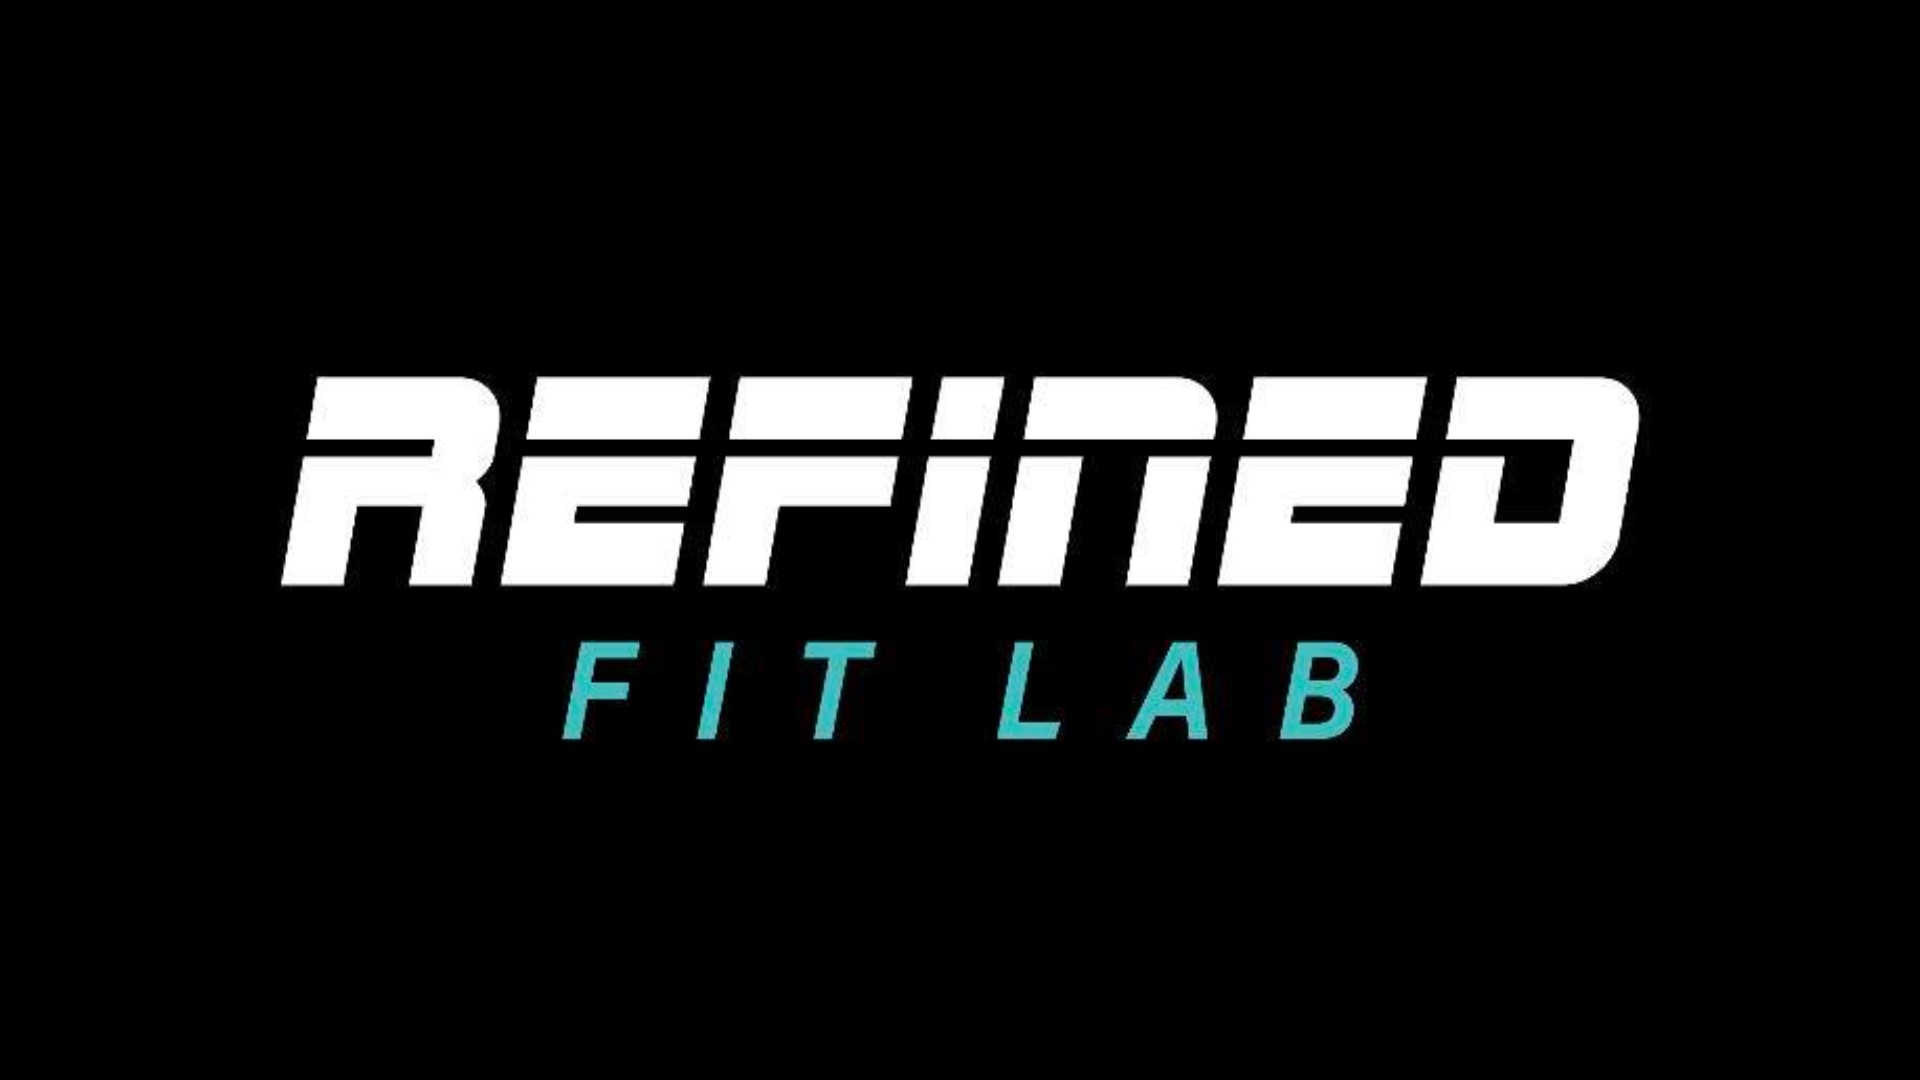 Refined Fit Lab is located in Downtown Rock Island near the Rock Island Public Library